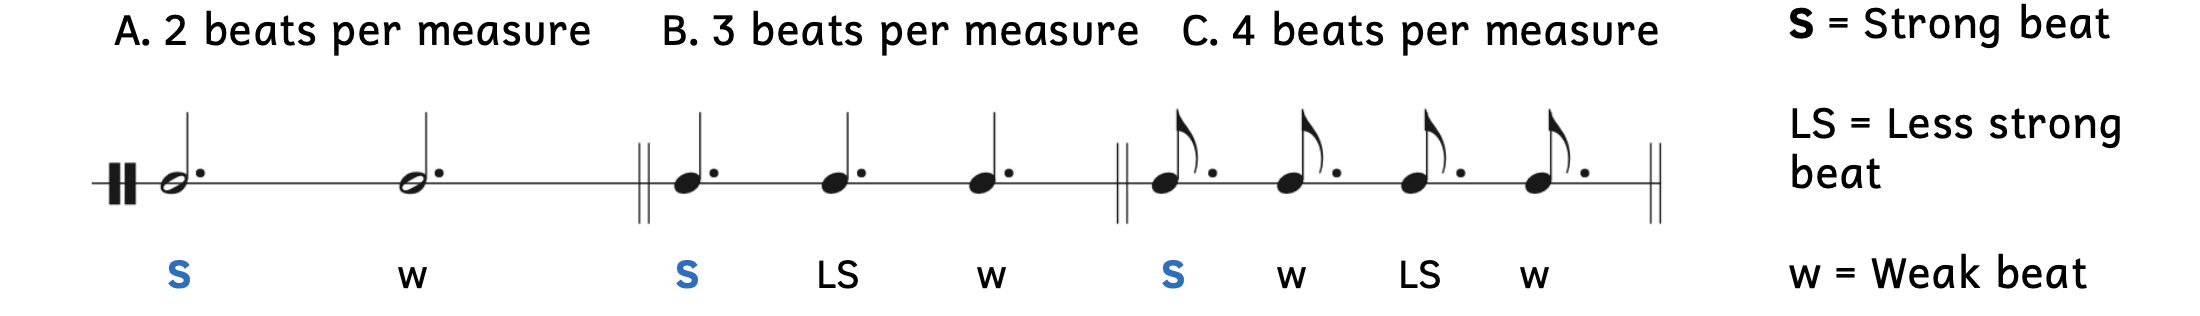 Example A shows that when there are 2 beats per measure, the first beat is strong and the second beat is weak. Example B shows that when there are 3 beats per measure, the first beat is strong, the second beat is less strong, and the third beat is weak. Example C shows that when there are 4 beats per measure, the first beat is strong, the second beat is weak, the third beat is less strong, and the fourth beat is weak.